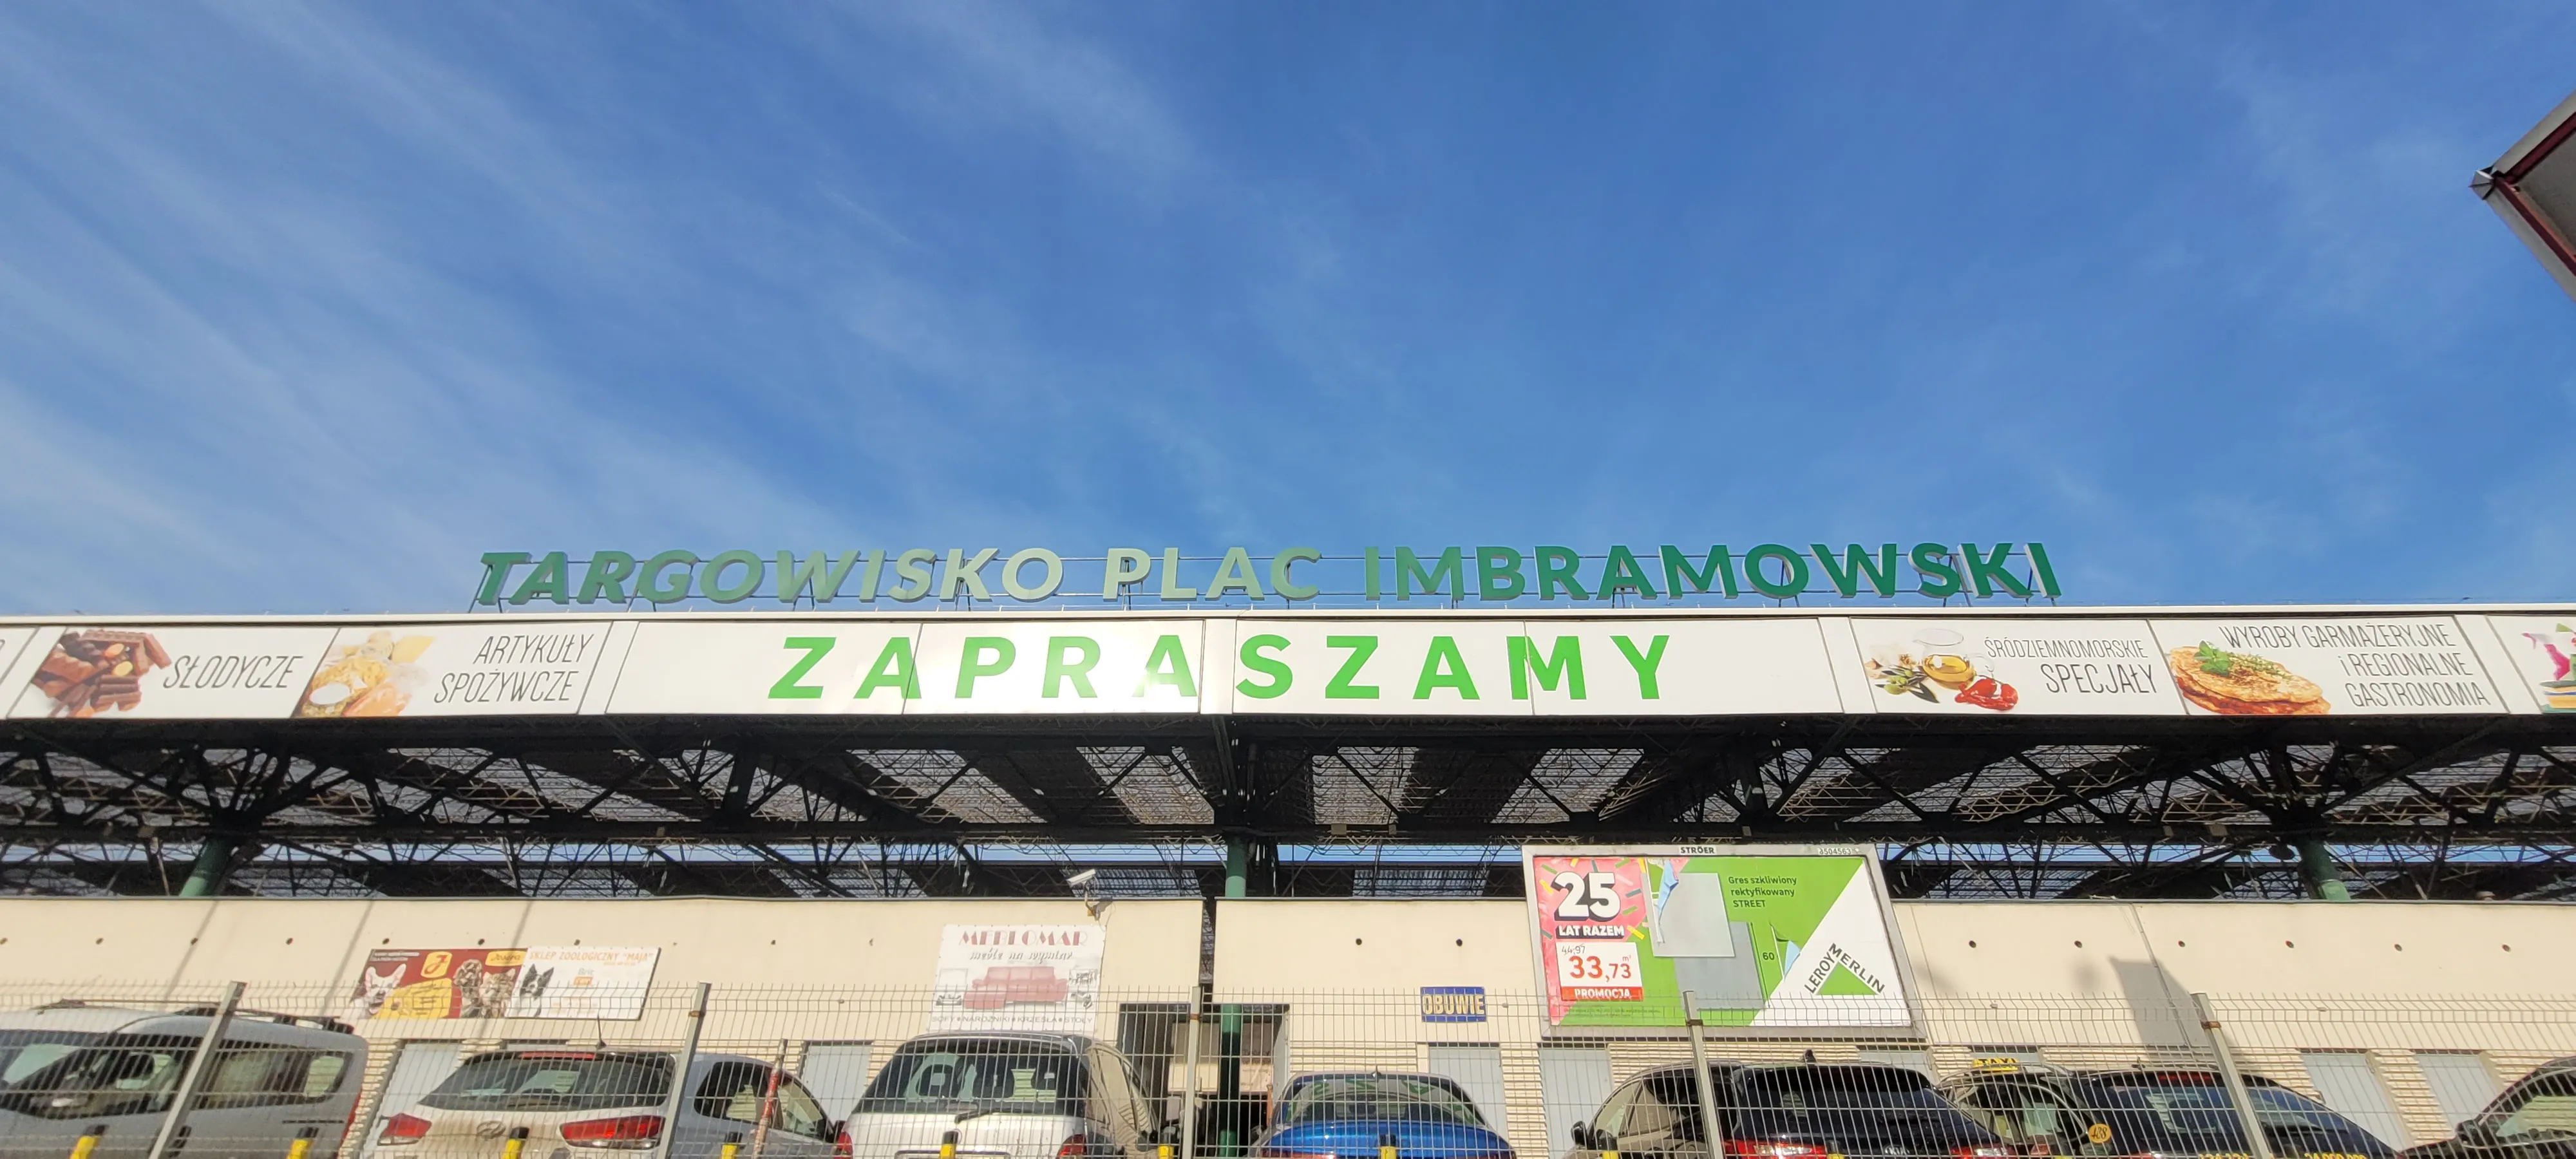 Imbramowski Square in Poland, europe | Spices,Organic Food,Dairy,Fruit & Vegetable,Herbs - Country Helper